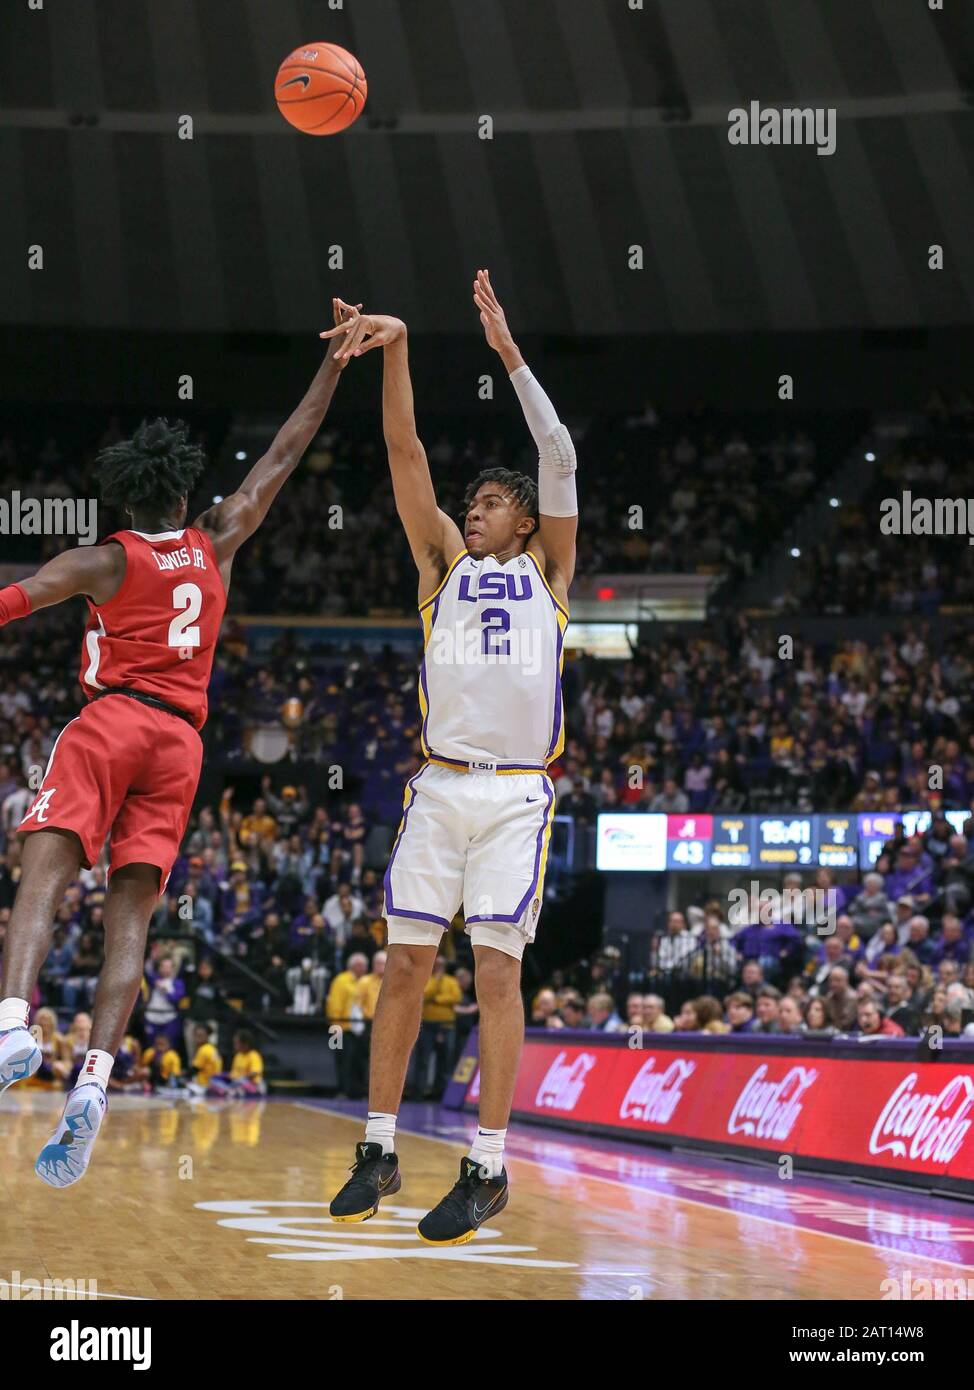 January 29, 2020: LSU's Trendon Watford (2) puts up a shot over Alabama's Kira Lewis Jr. (2) during NCAA Basketball action between the Alabama Crimson Tide and the LSU Tigers at the Pete Maravich Assembly Center in Baton Rouge, LA. Jonathan Mailhes/CSM Stock Photo